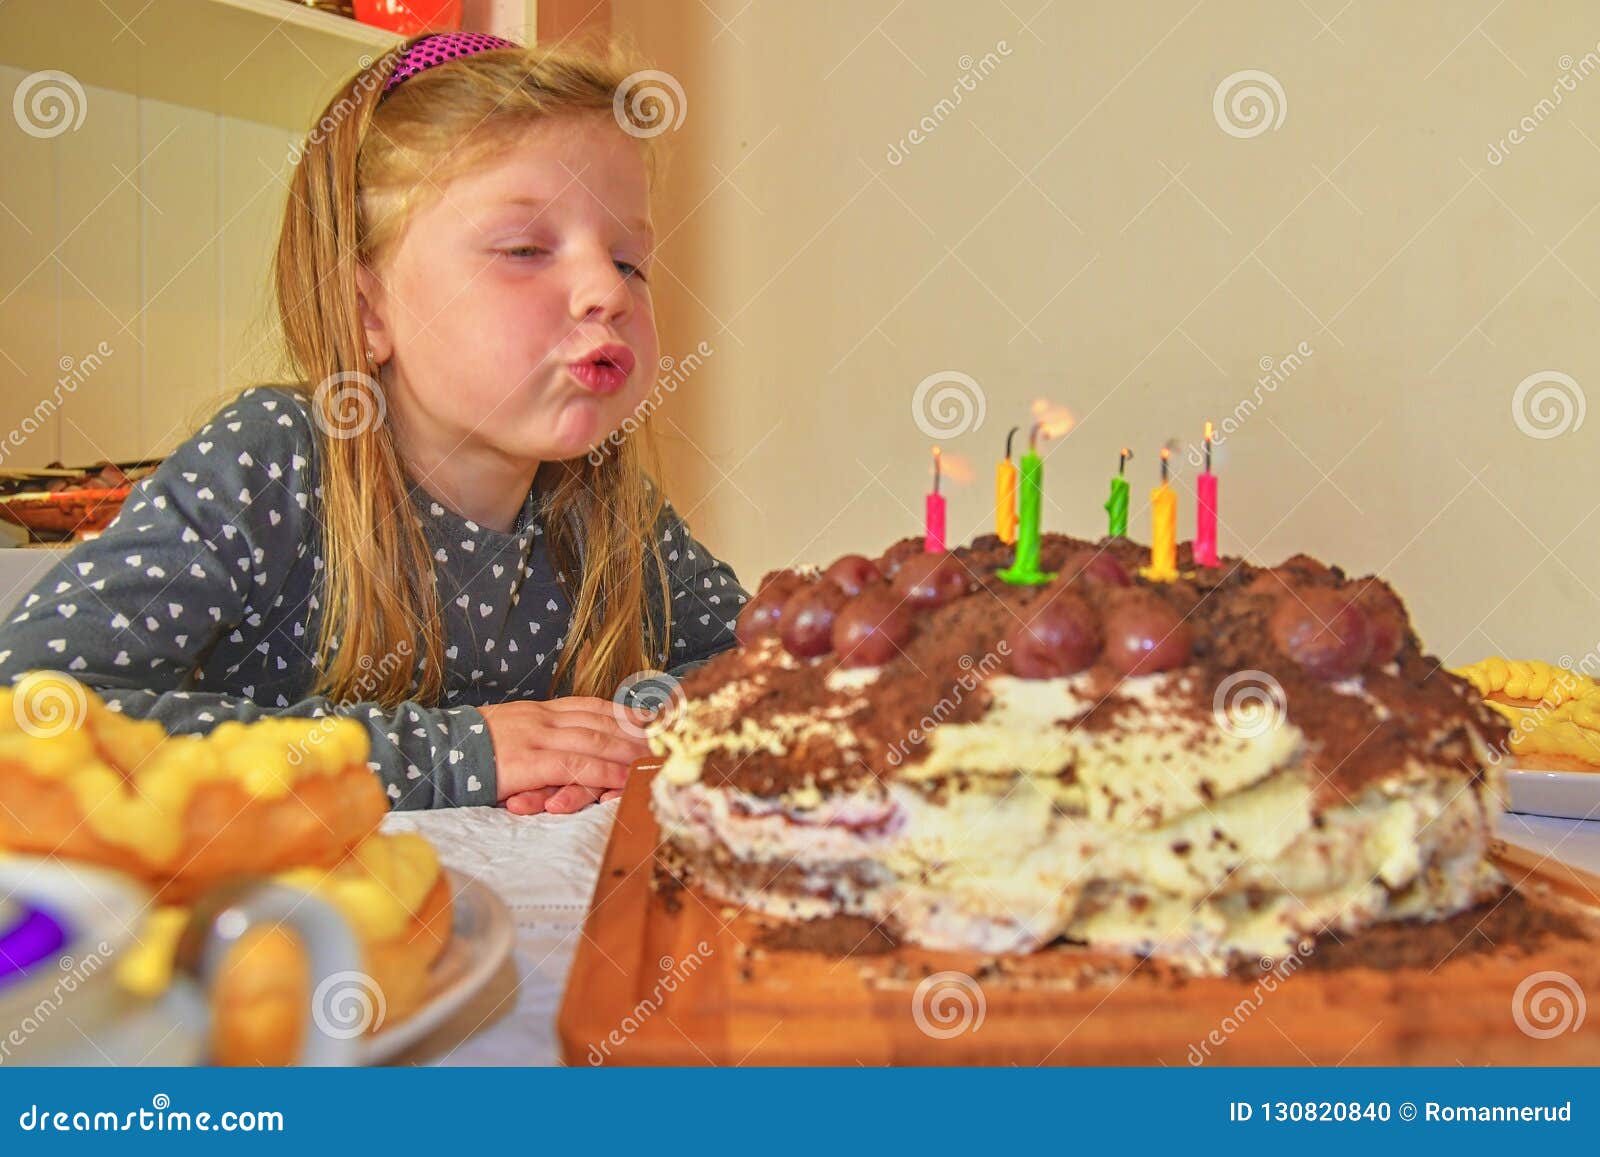 Little Girl Blowing Out Candles on Her Birthday Cake. Small Girl ...